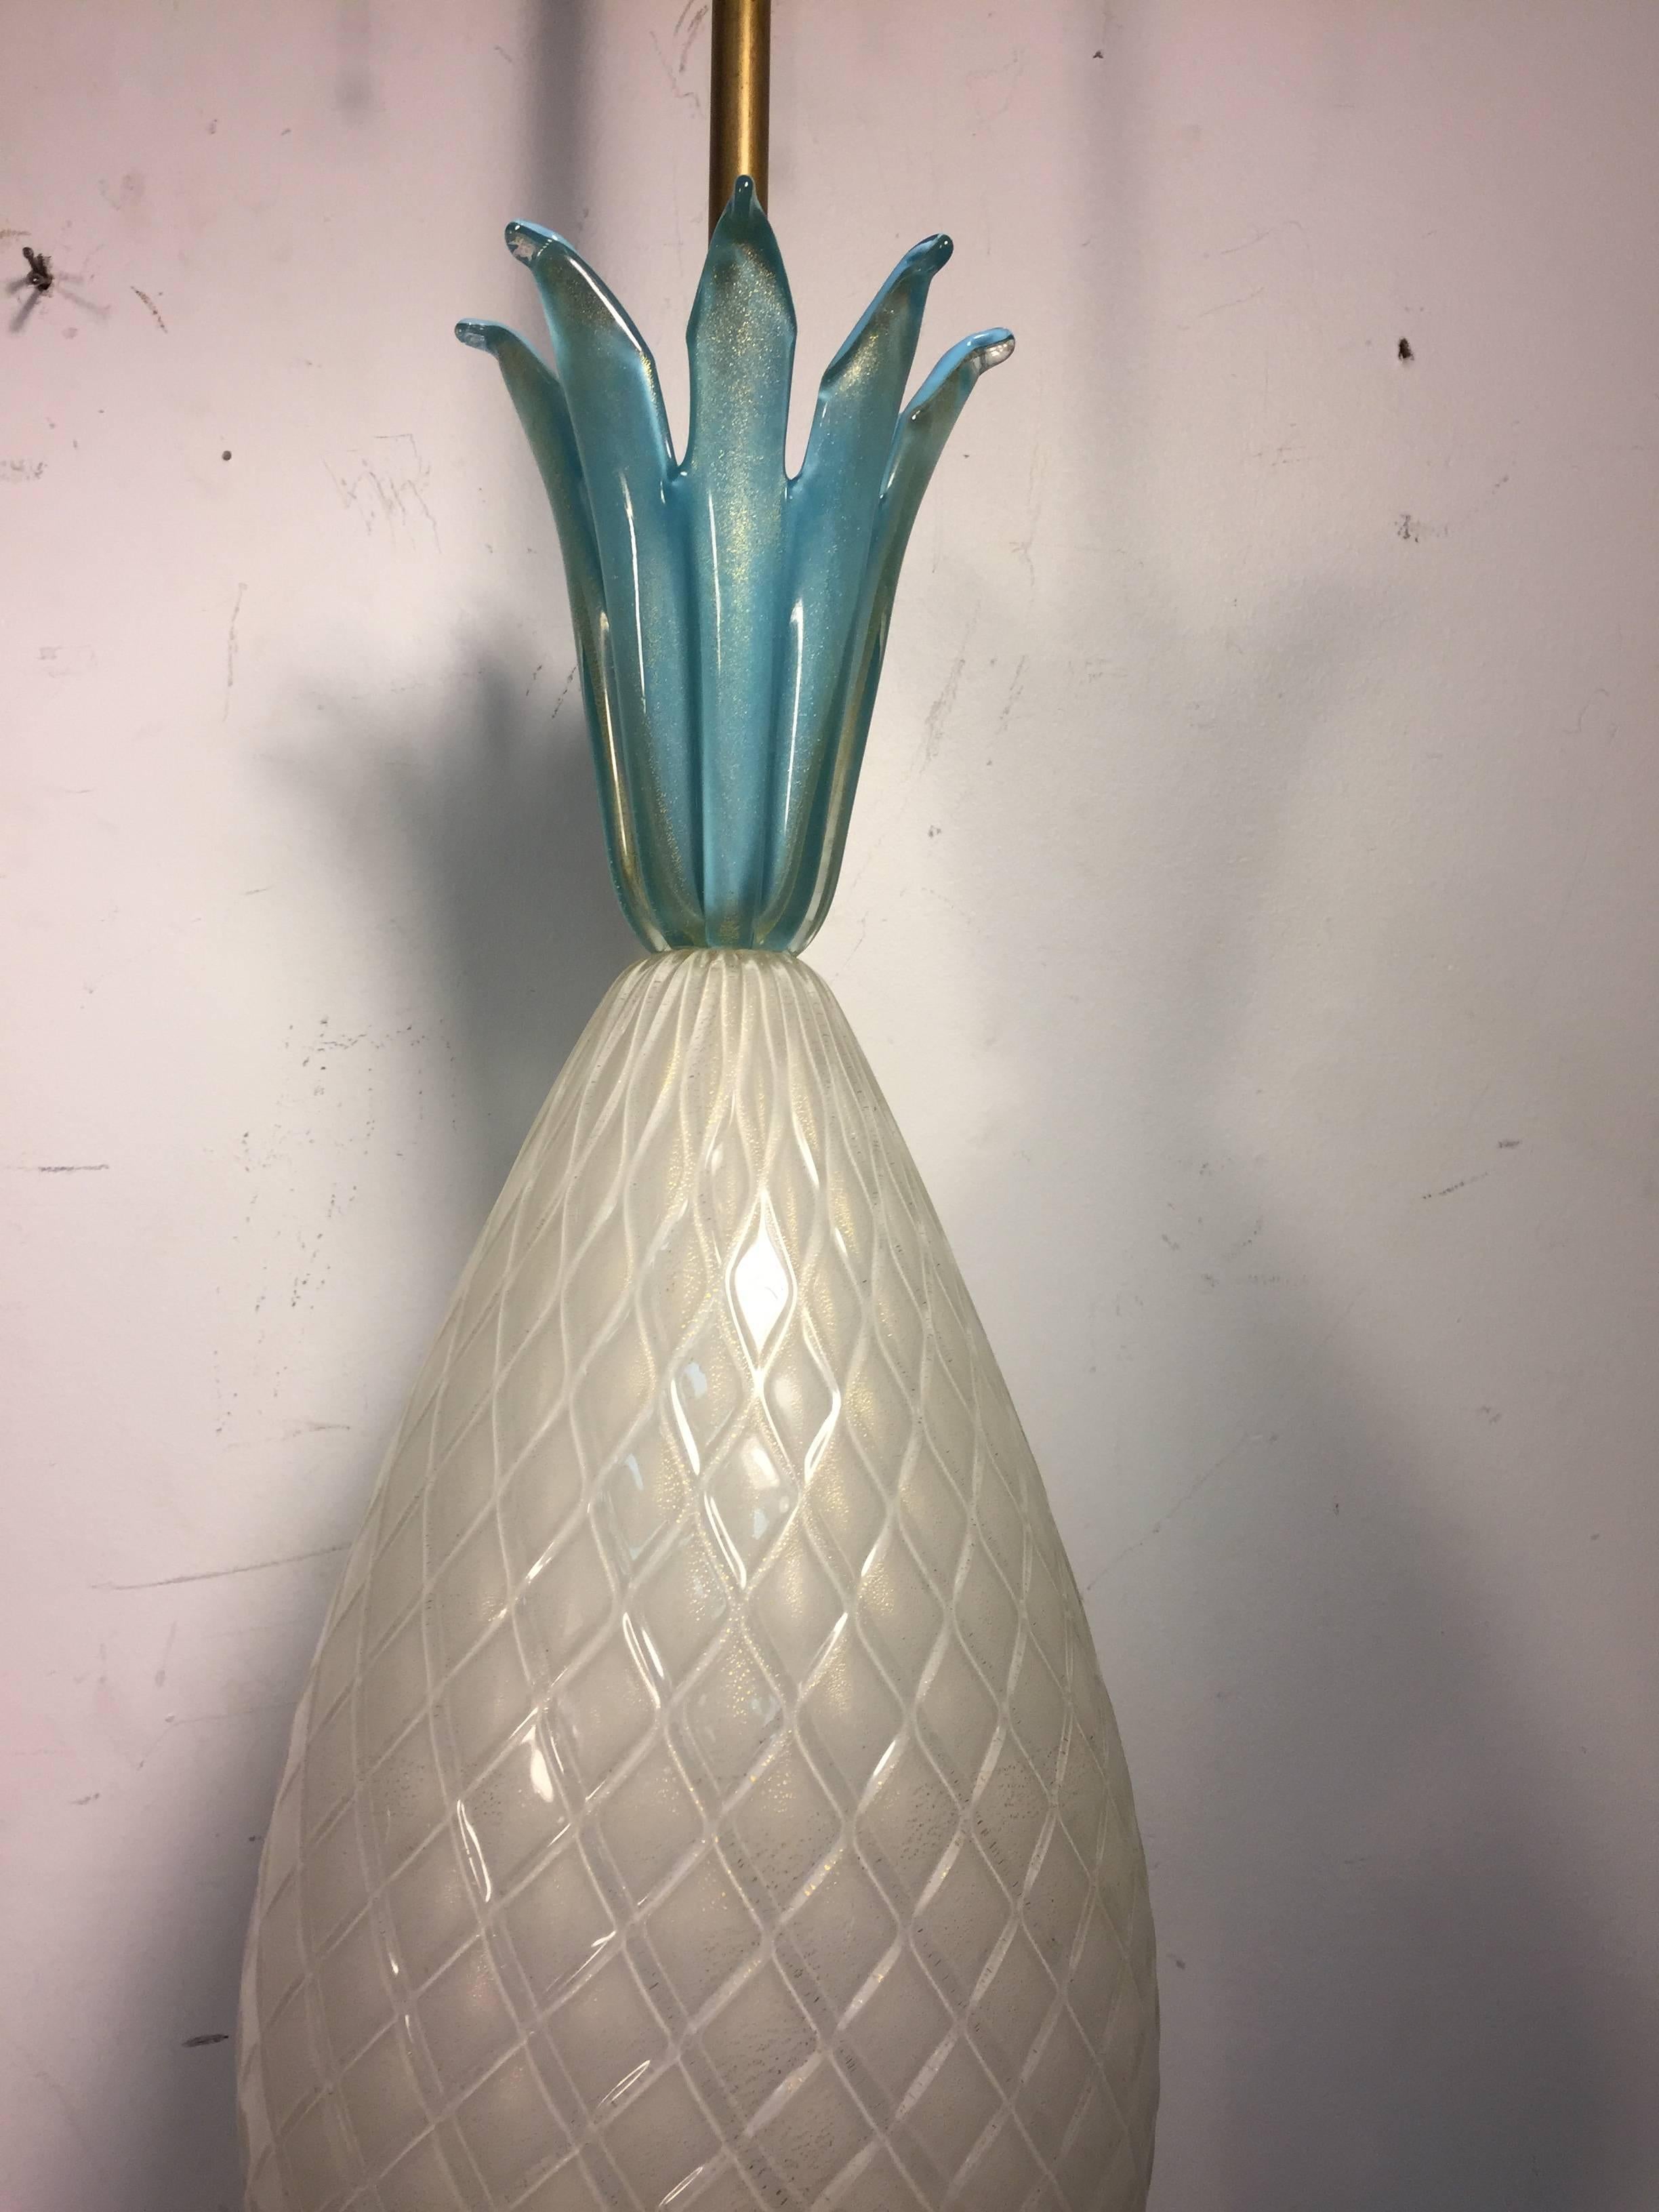 Sensational Murano Glass Pineapple Form Table Lamp by Seguso In Good Condition For Sale In Mount Penn, PA